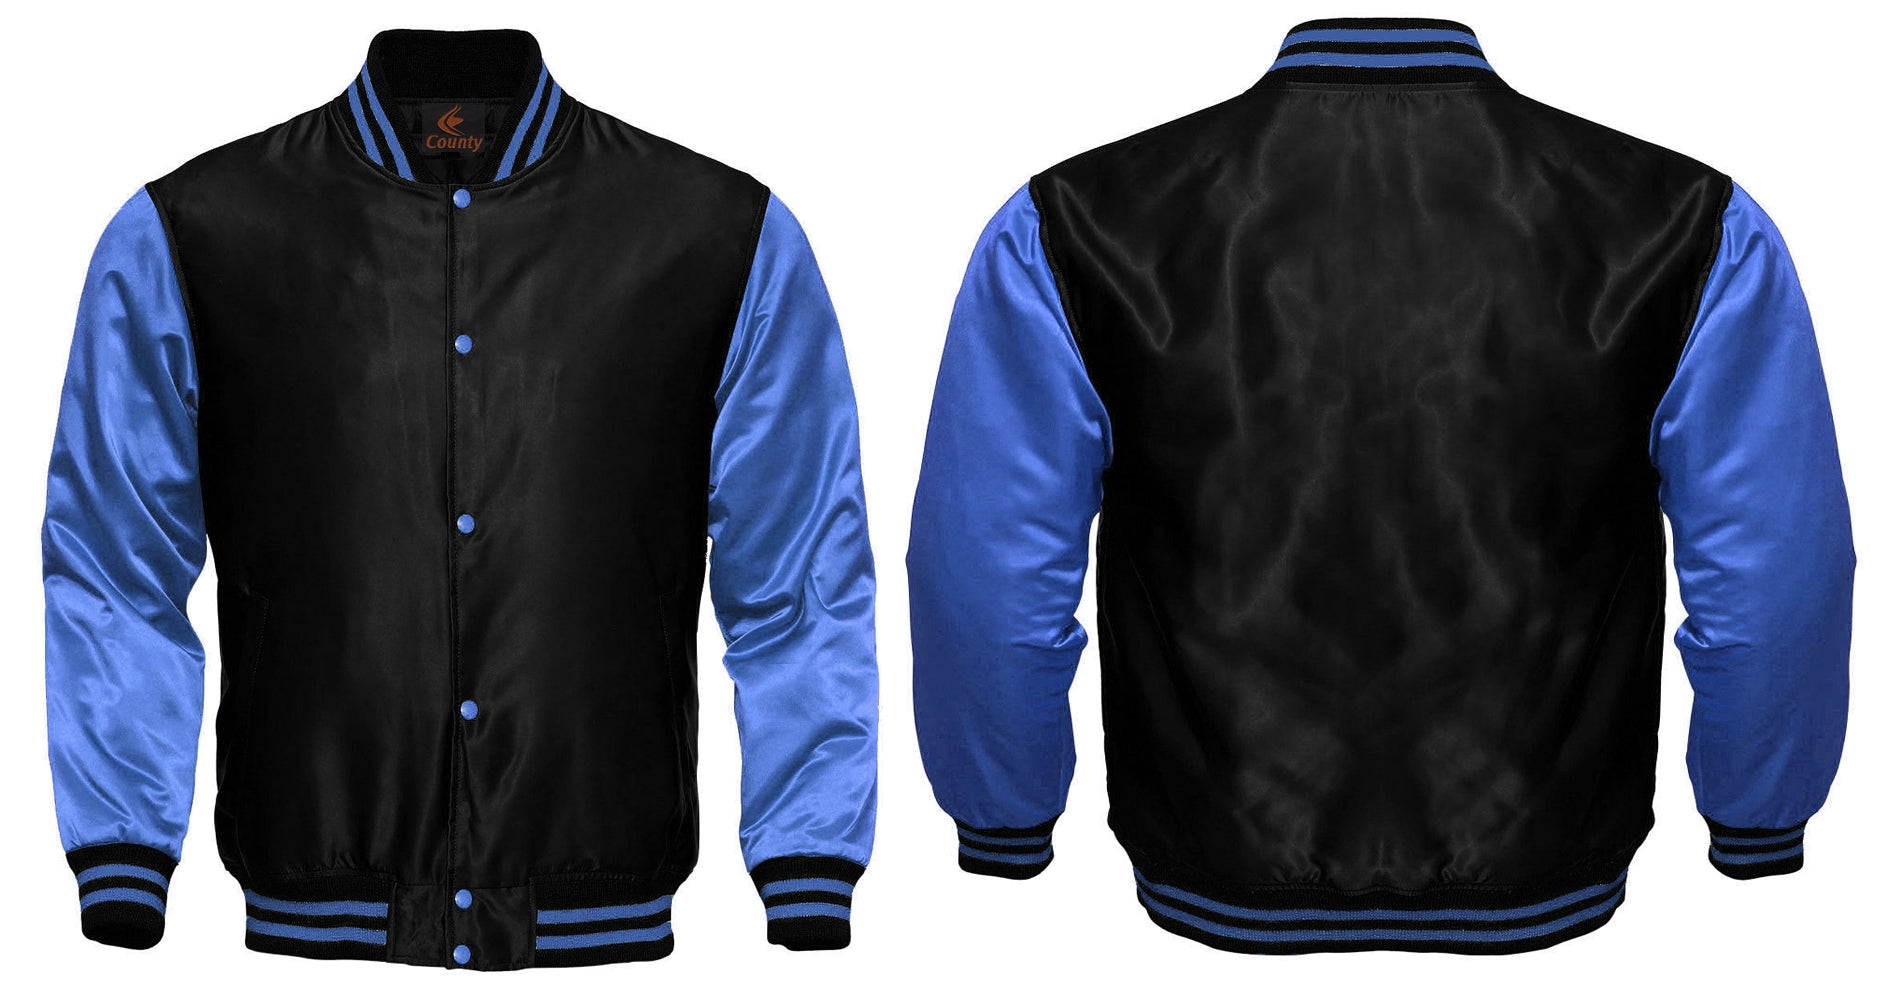 Baseball college varsity bomber jacket in black and sky blue satin, perfect for sports wear.